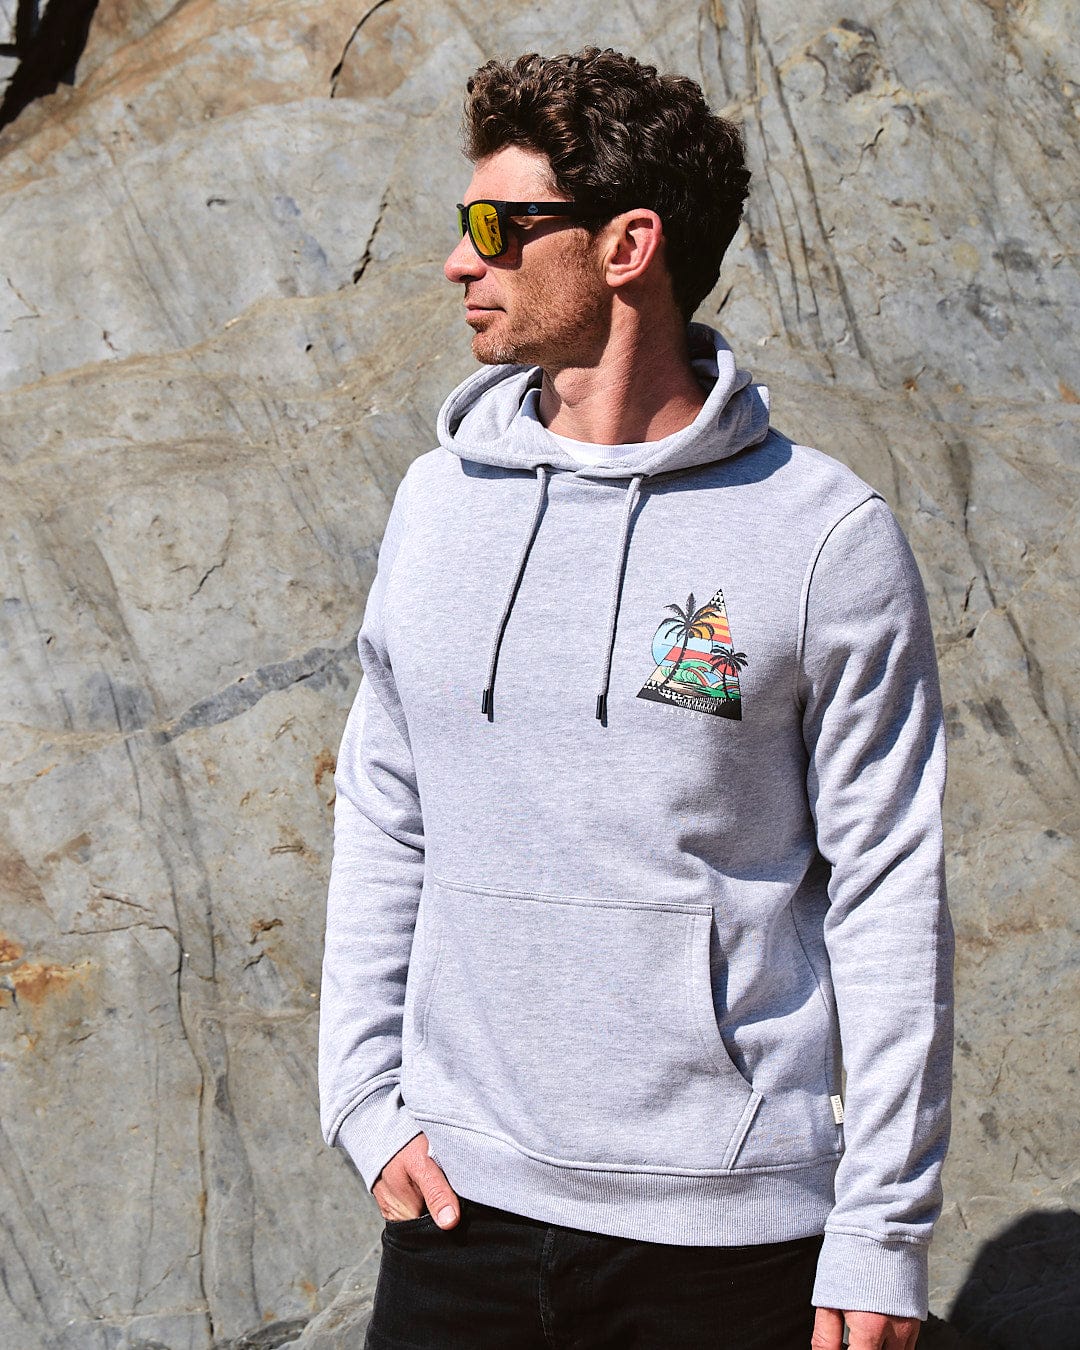 A man wearing sunglasses and a Geo Beach - Mens Pop Hoodie - Grey by Saltrock standing in front of a rock.